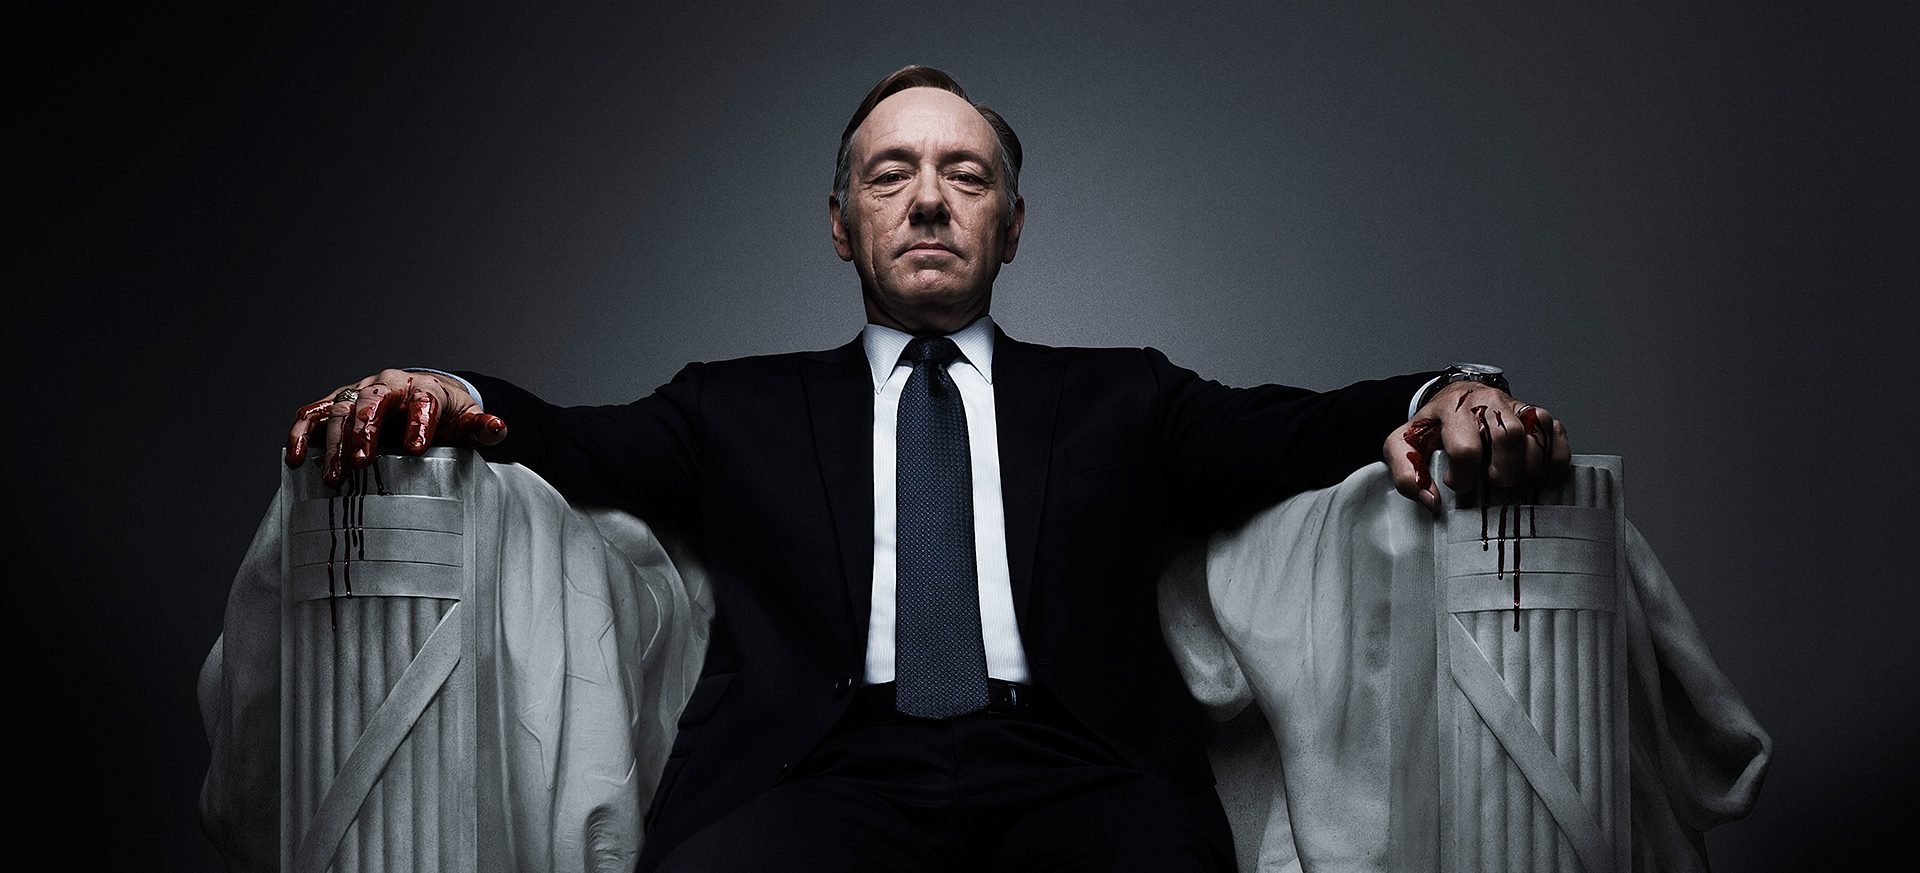 Netflix Suspends Production on ‘House of Cards’ – Season 6 in Doubt